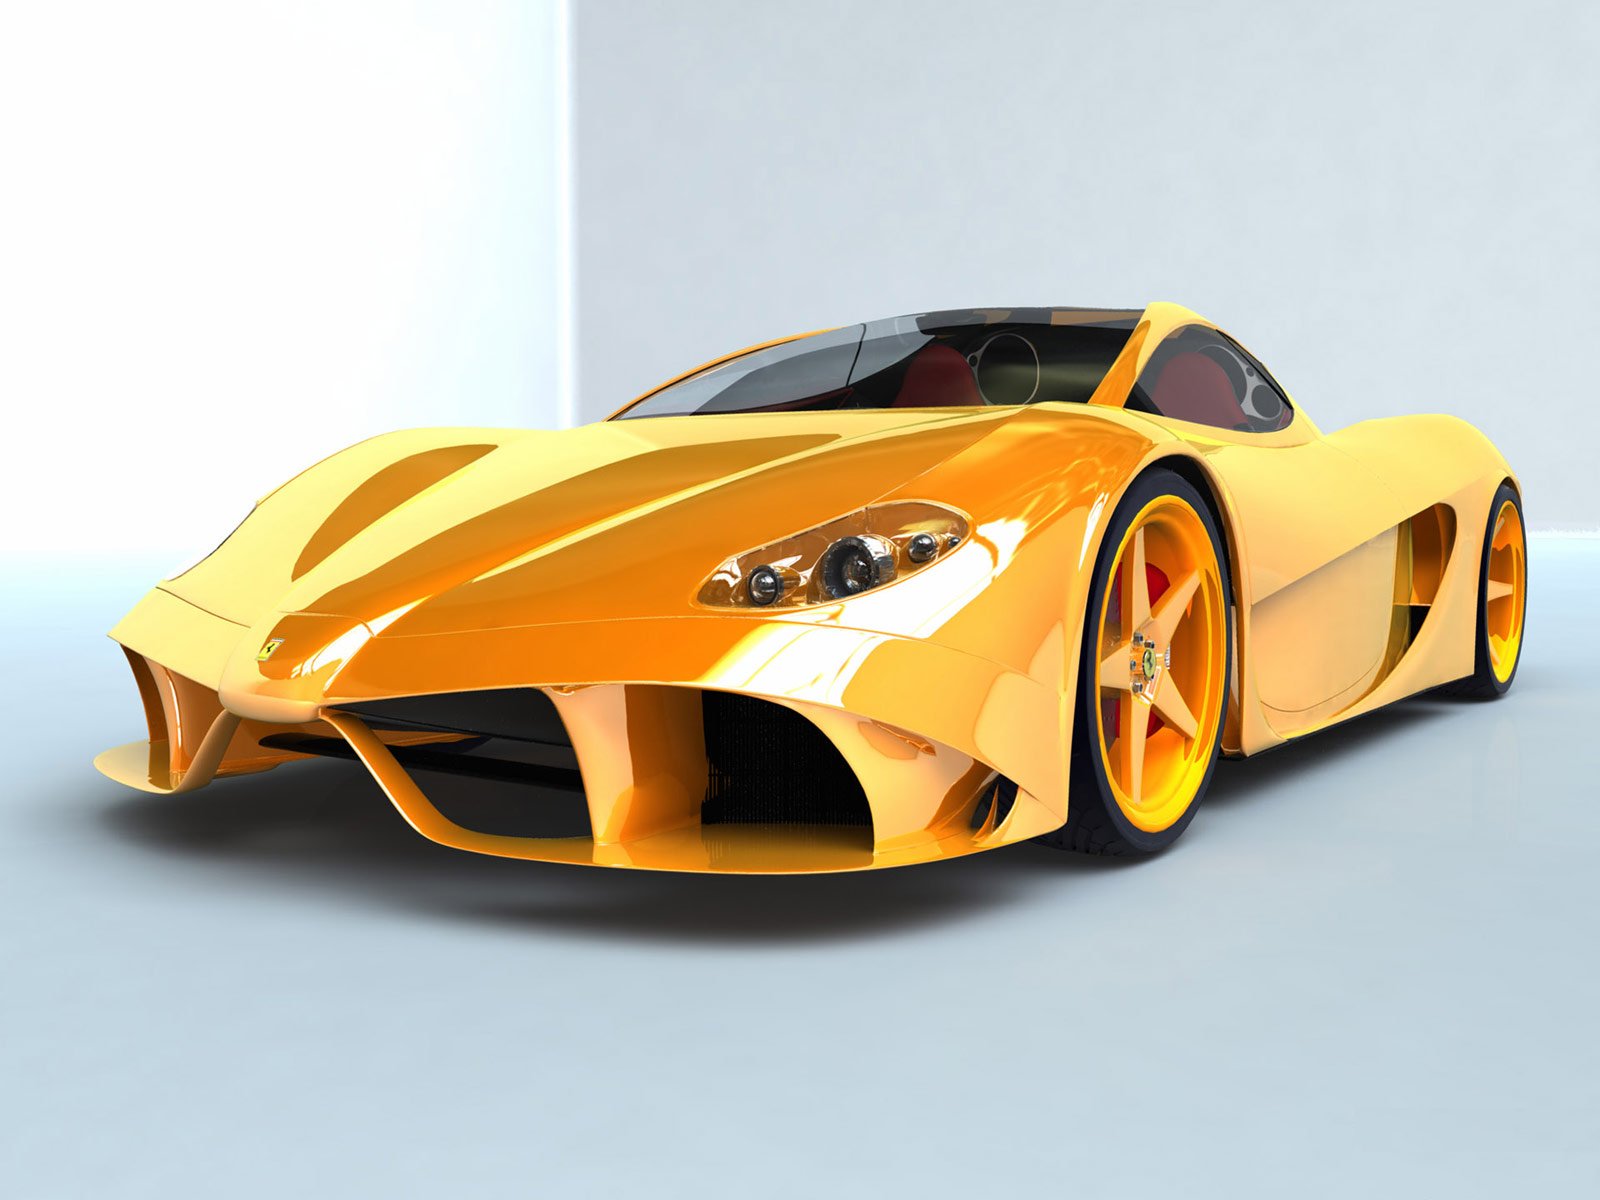 New cool cars wallpapers Online Auto Book 1600x1200